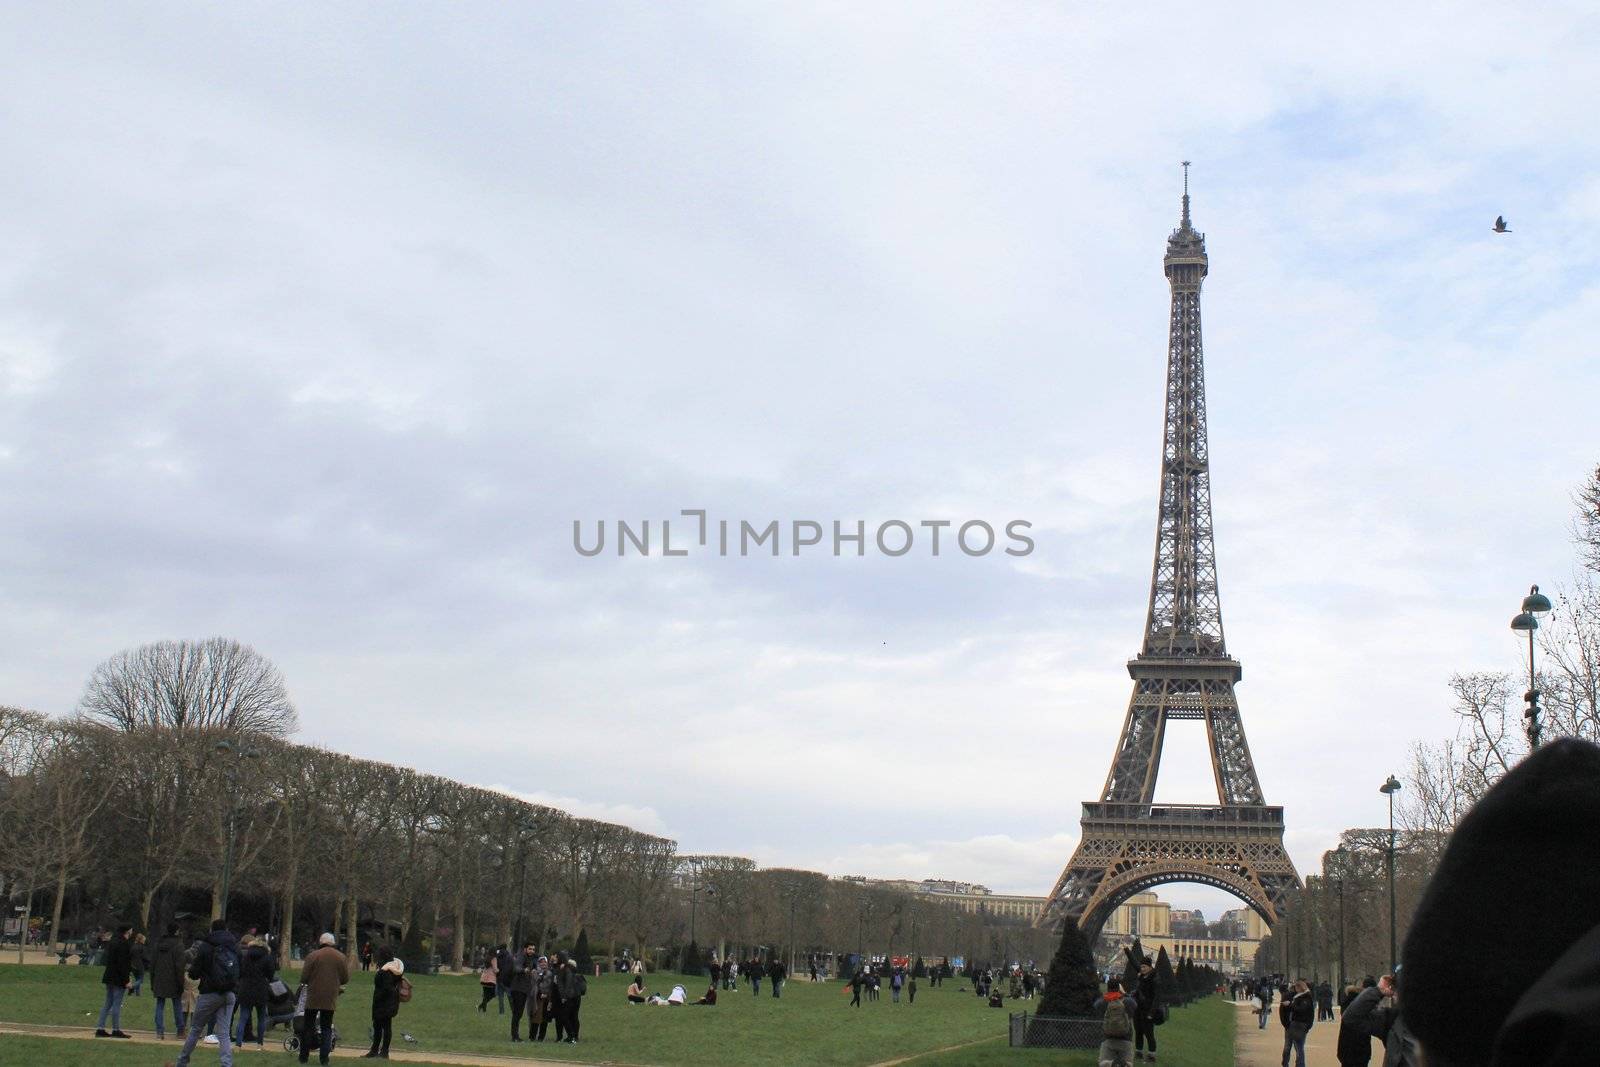 The Eiffel Tower in Paris, France. Nice scenery of the city